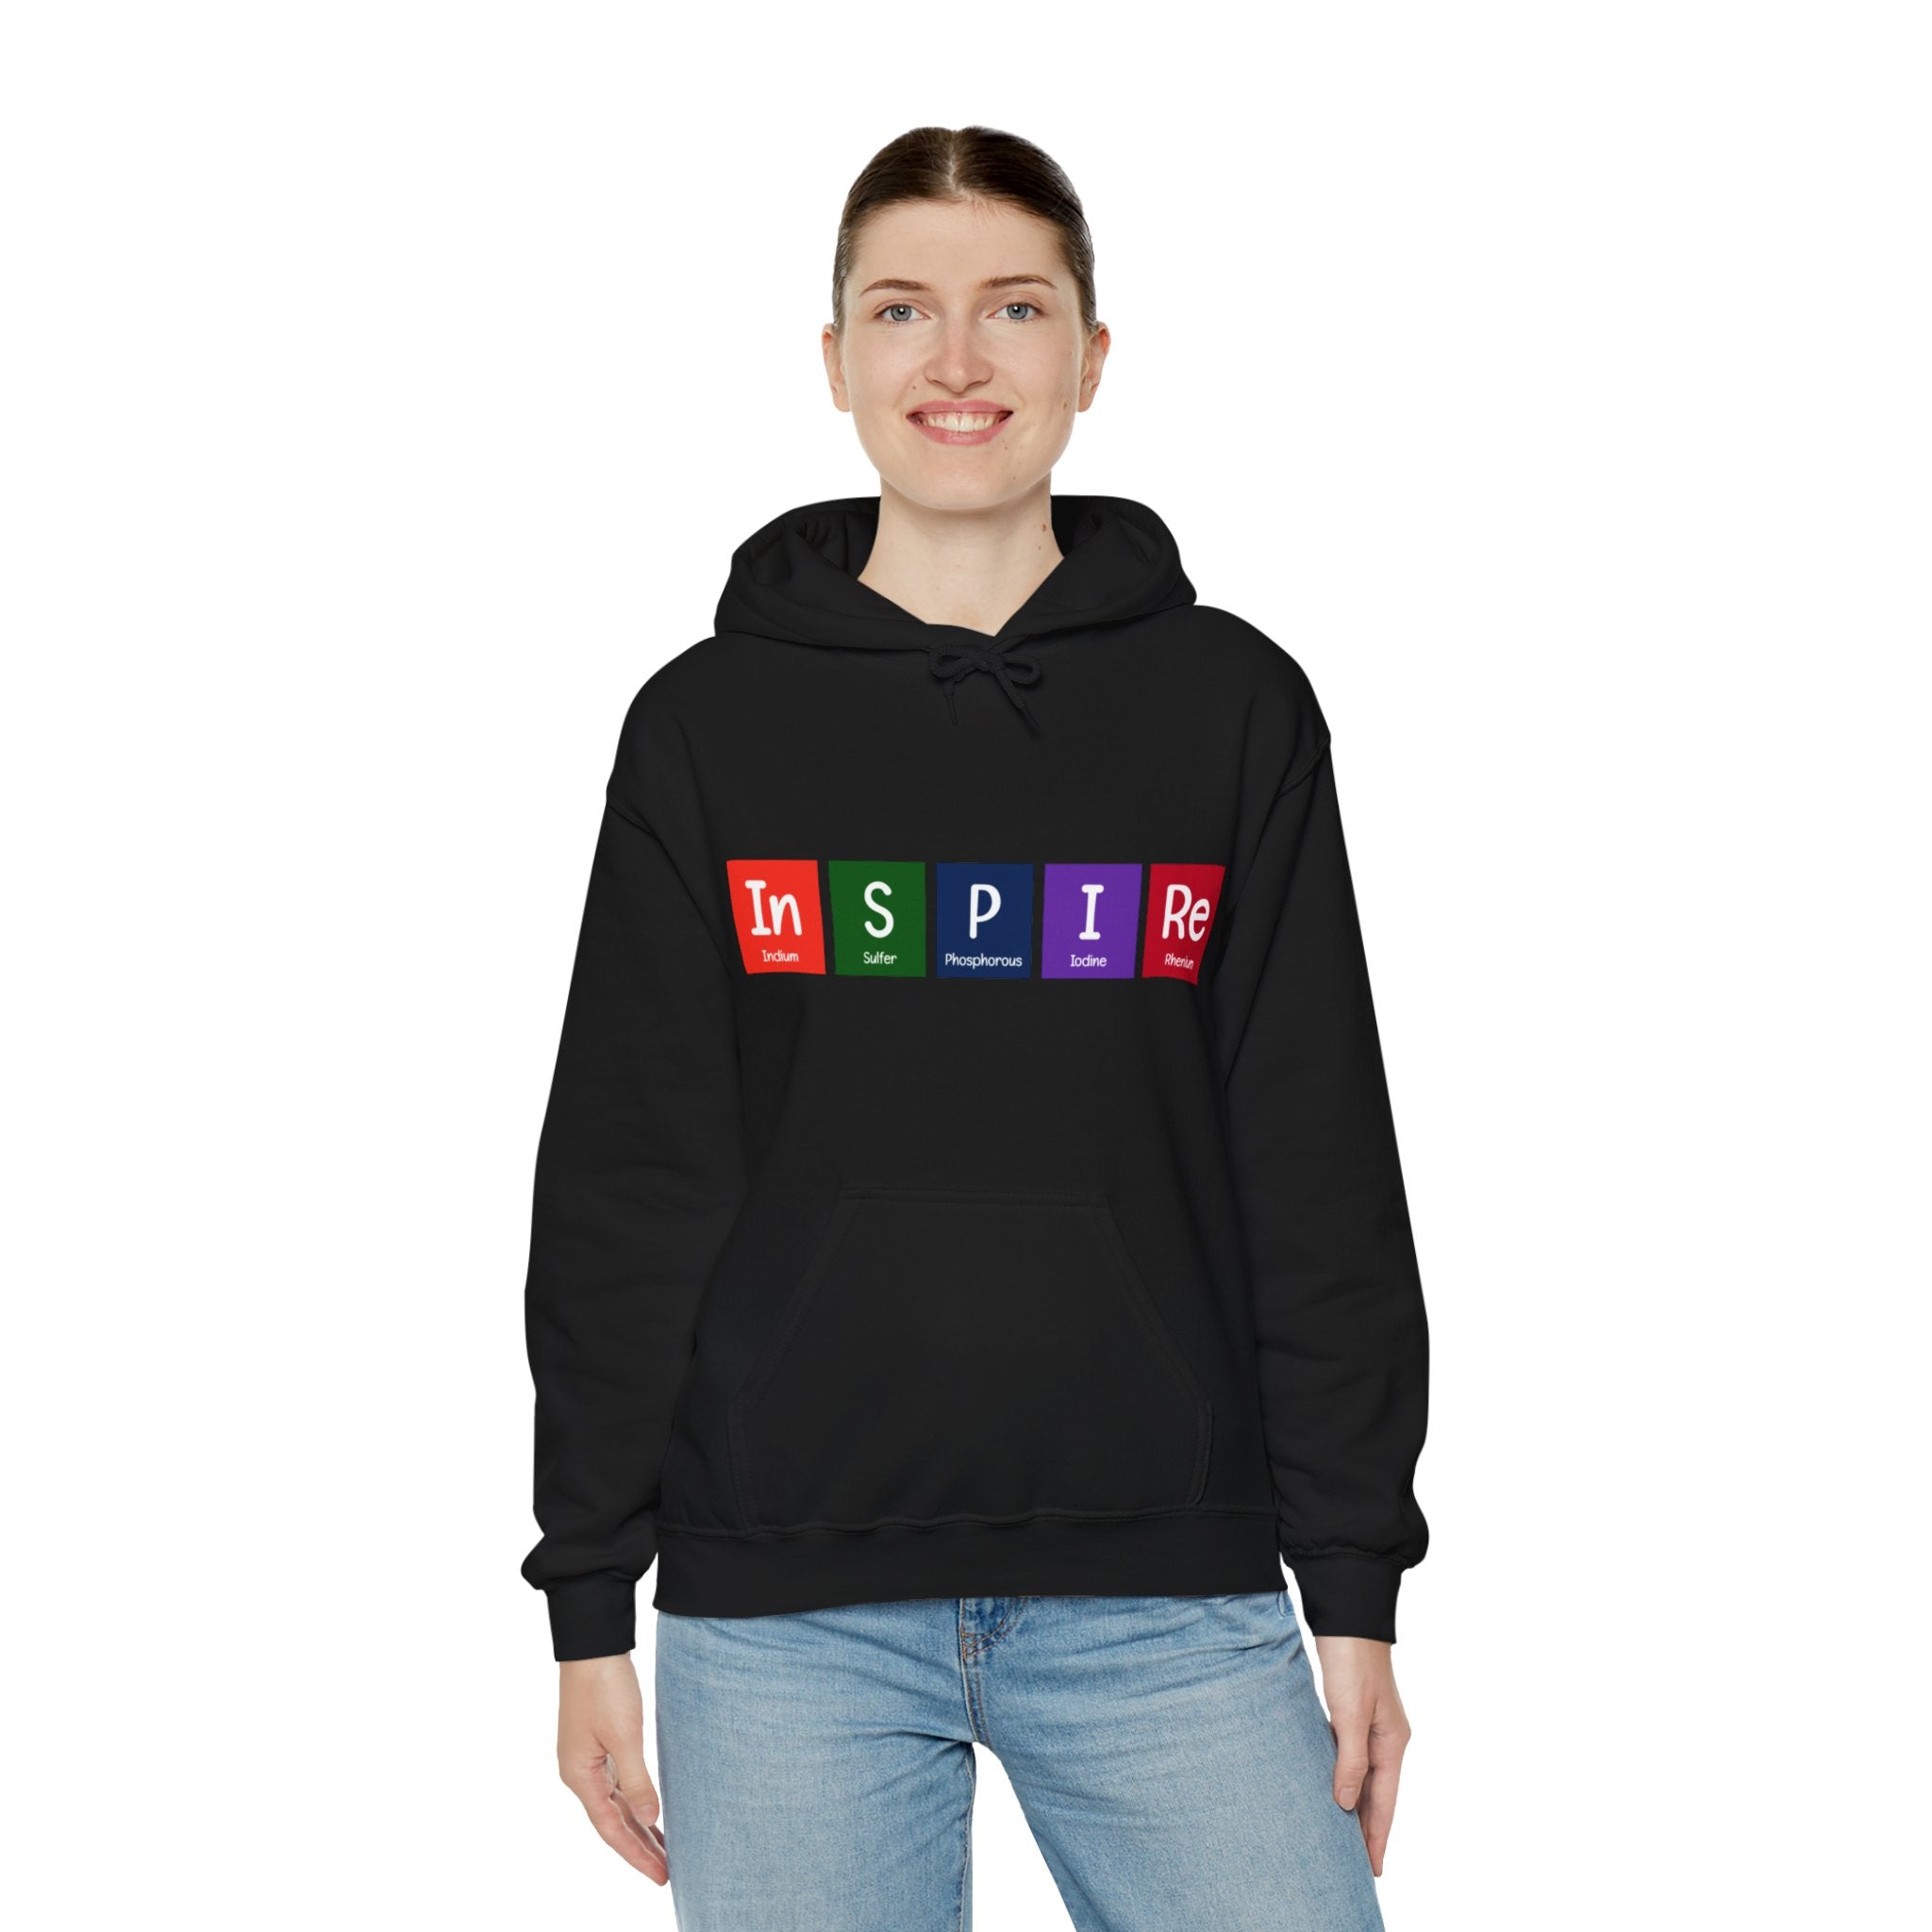 A person wearing the In-S-P-I-Re - Hooded Sweatshirt, a black hoodie with the word "INSPIRE" spelled out in colorful periodic table-like blocks. Perfect for daily wear, this comfy sweatshirt combines style and inspiration effortlessly.